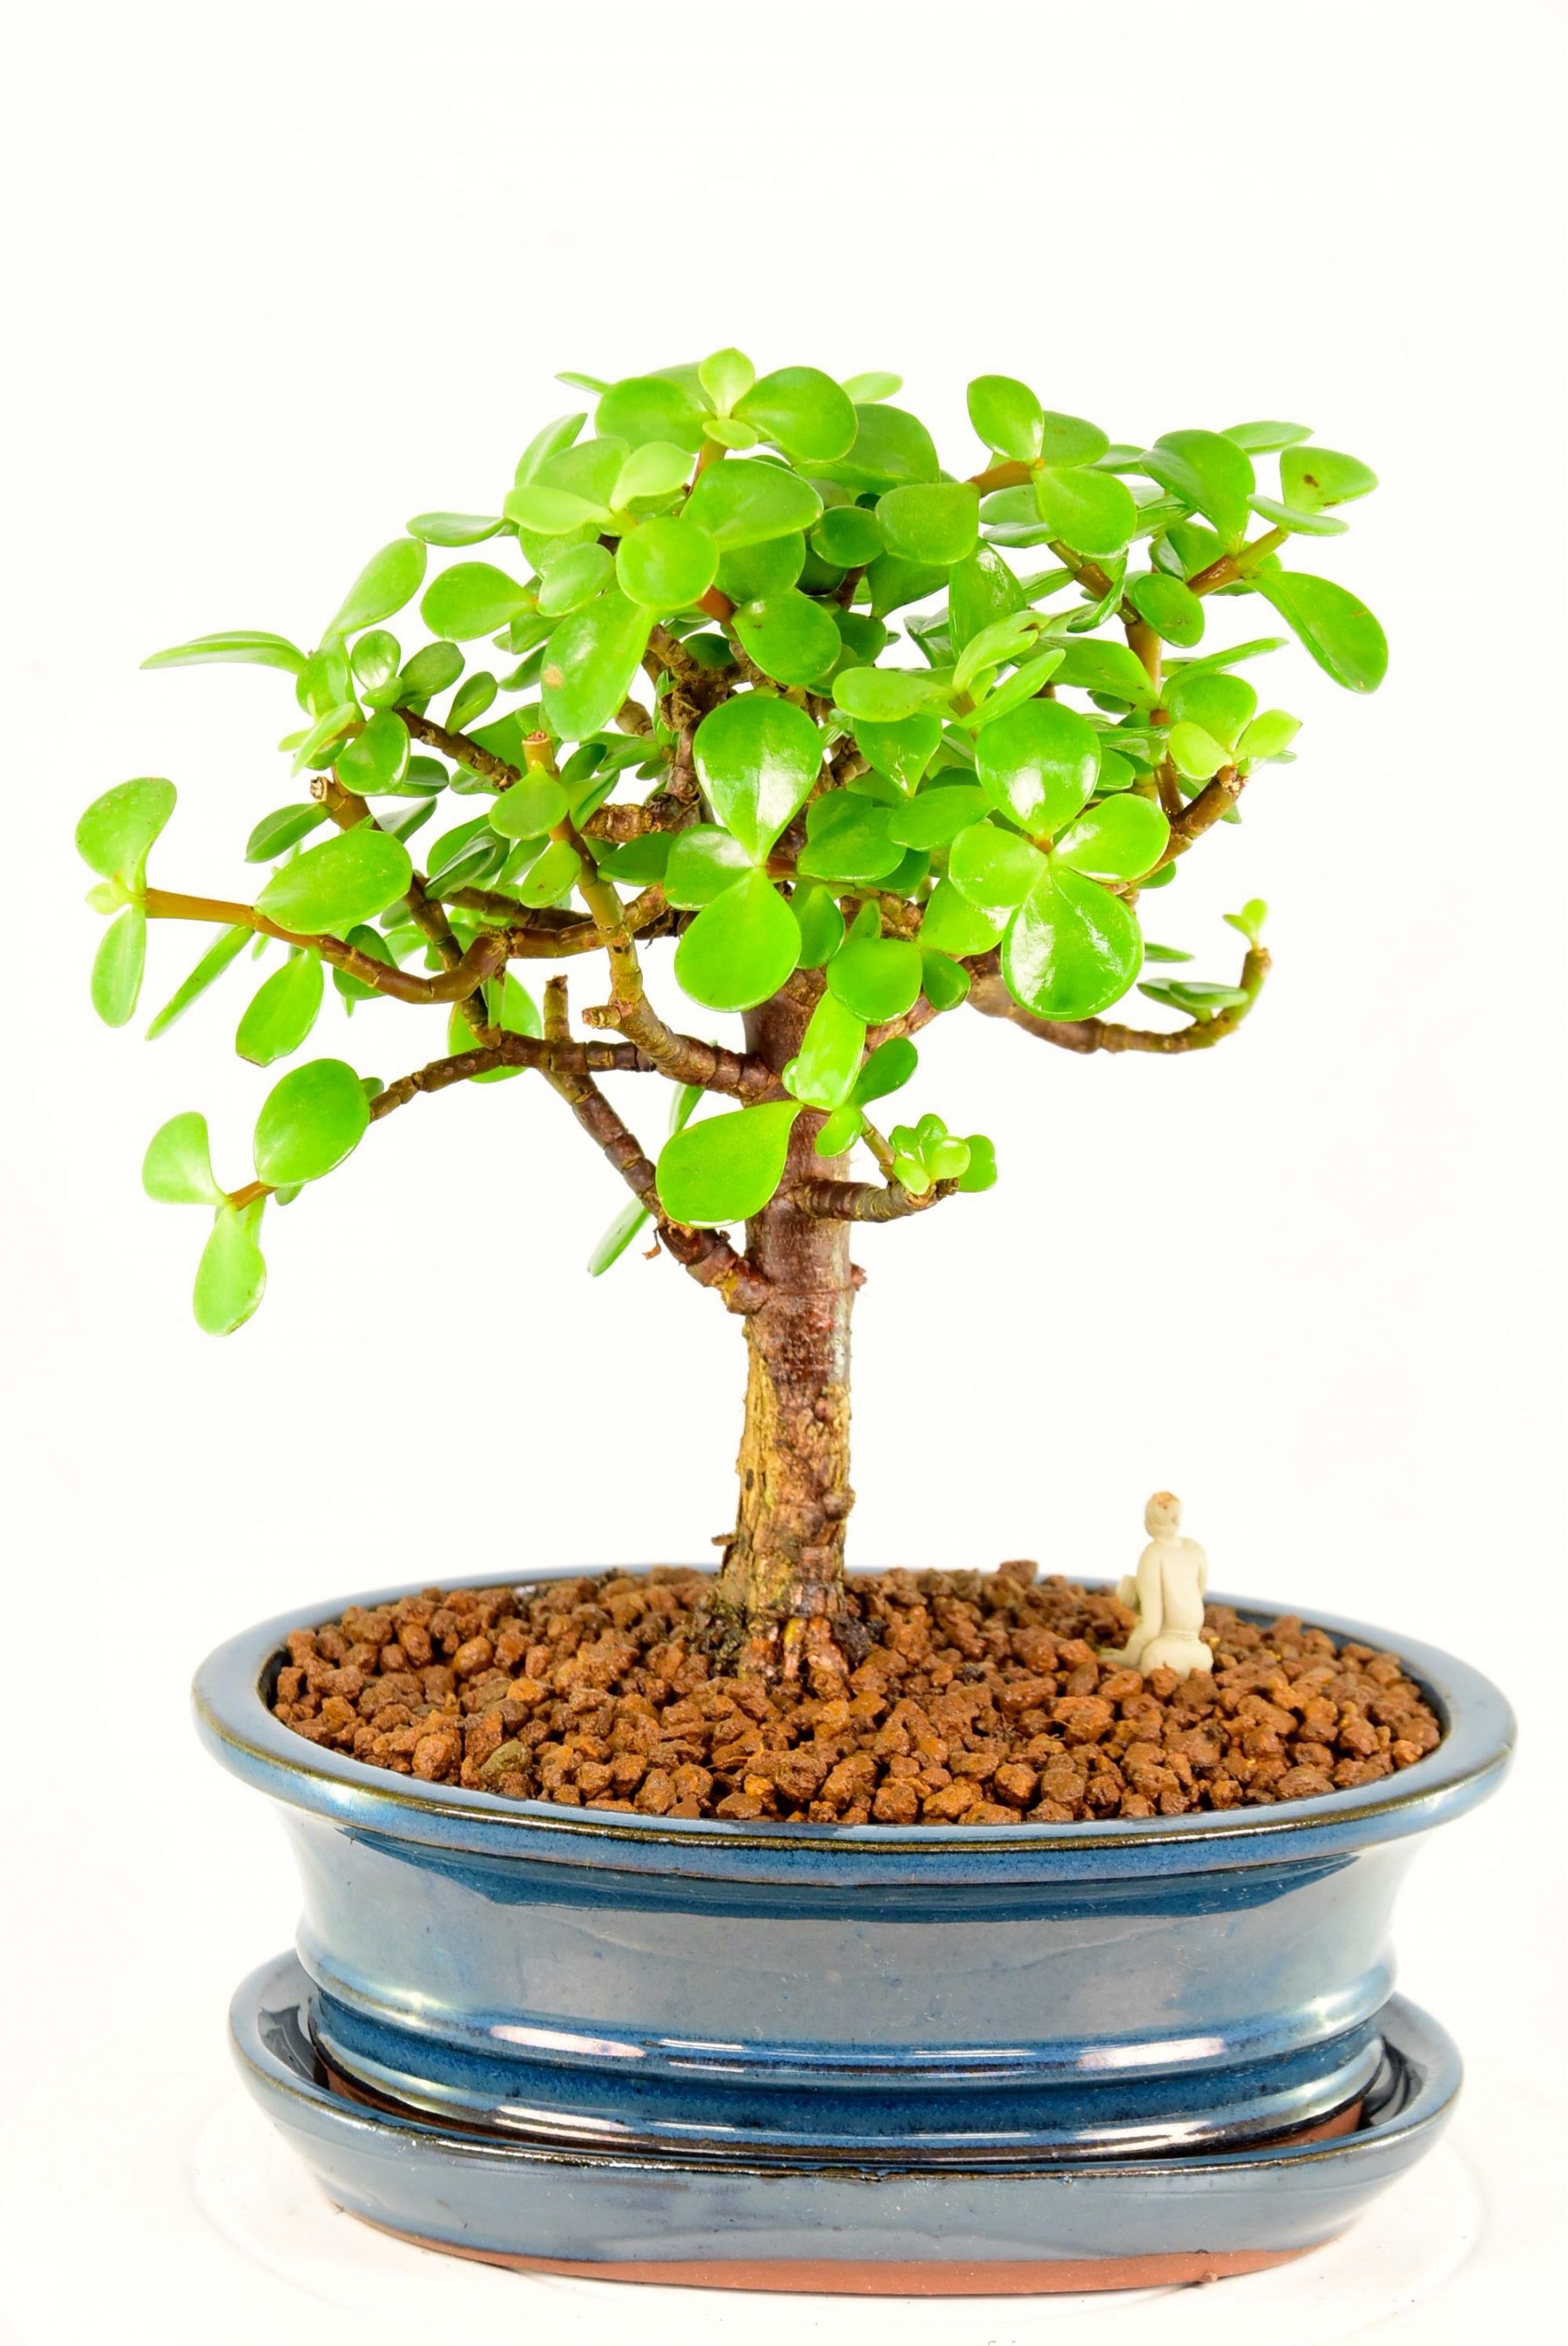 Premium Indoor Jade bonsai tree for sale in the UK. Free delivery.